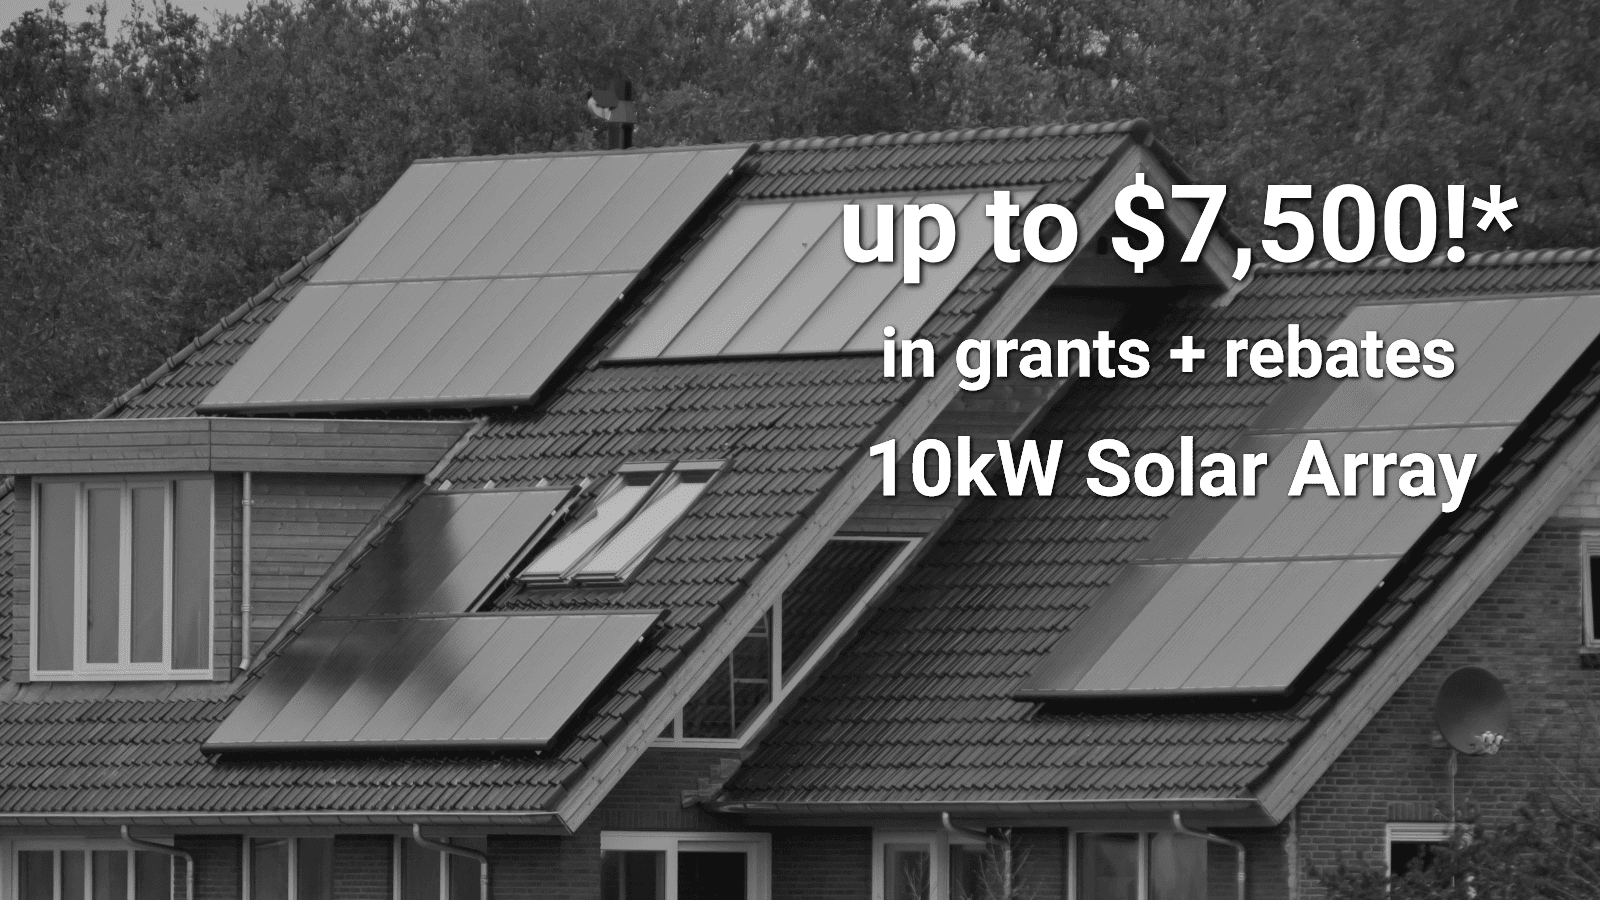 Up to $7,500 in Grants and Rebates for Solar